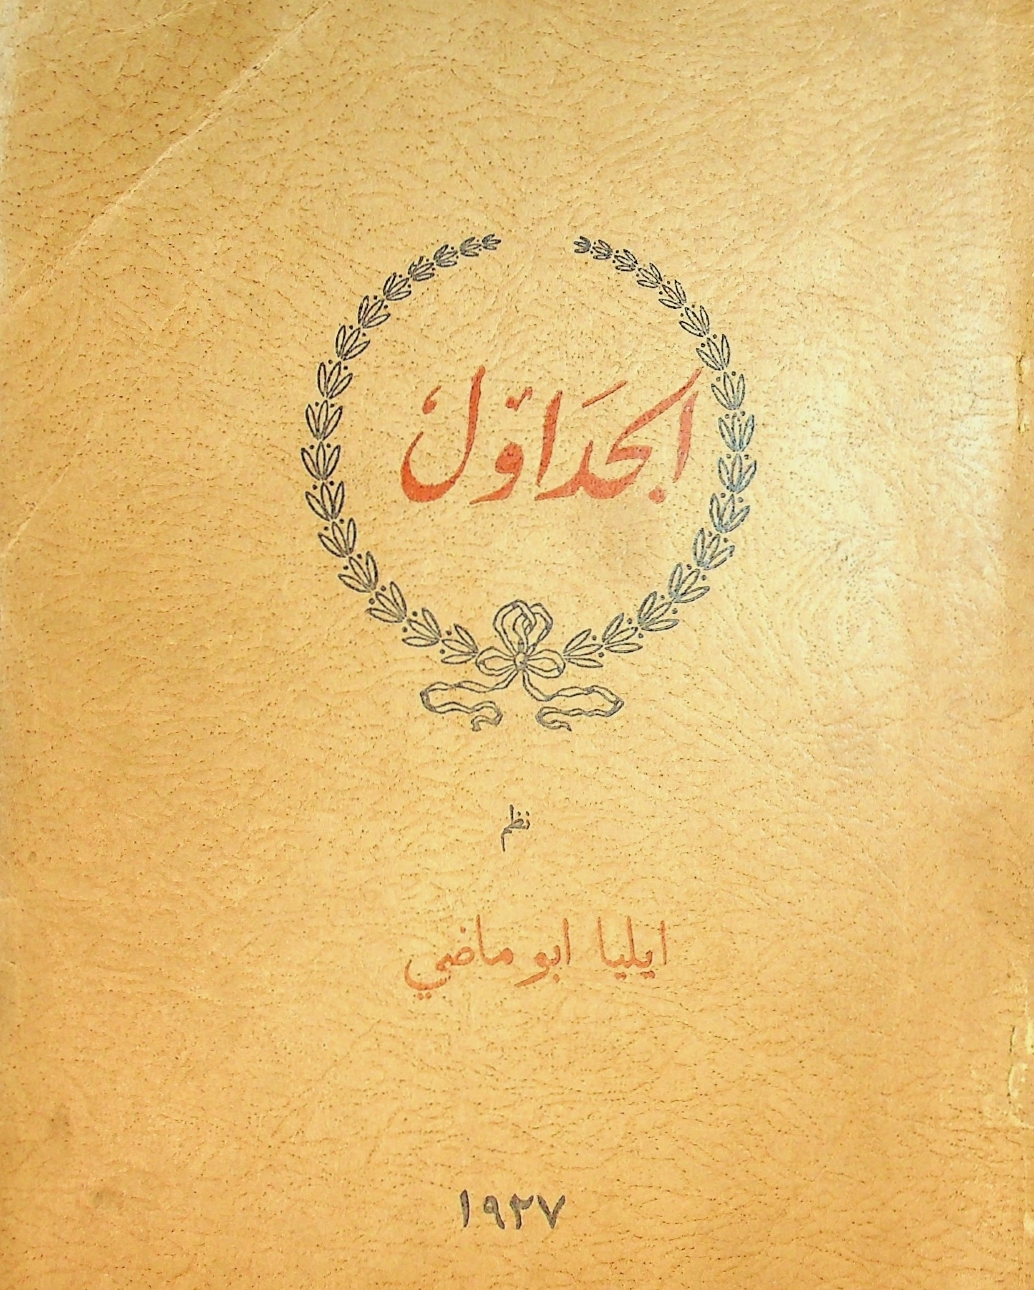 Elia Abu Madi, Al-Jadawil (The Streams), with an introduction by Mikhail Naimy and drawings by Kahlil Gibran, New York: Mir'at al-Gharb al-Yawmiyyah, 1927.